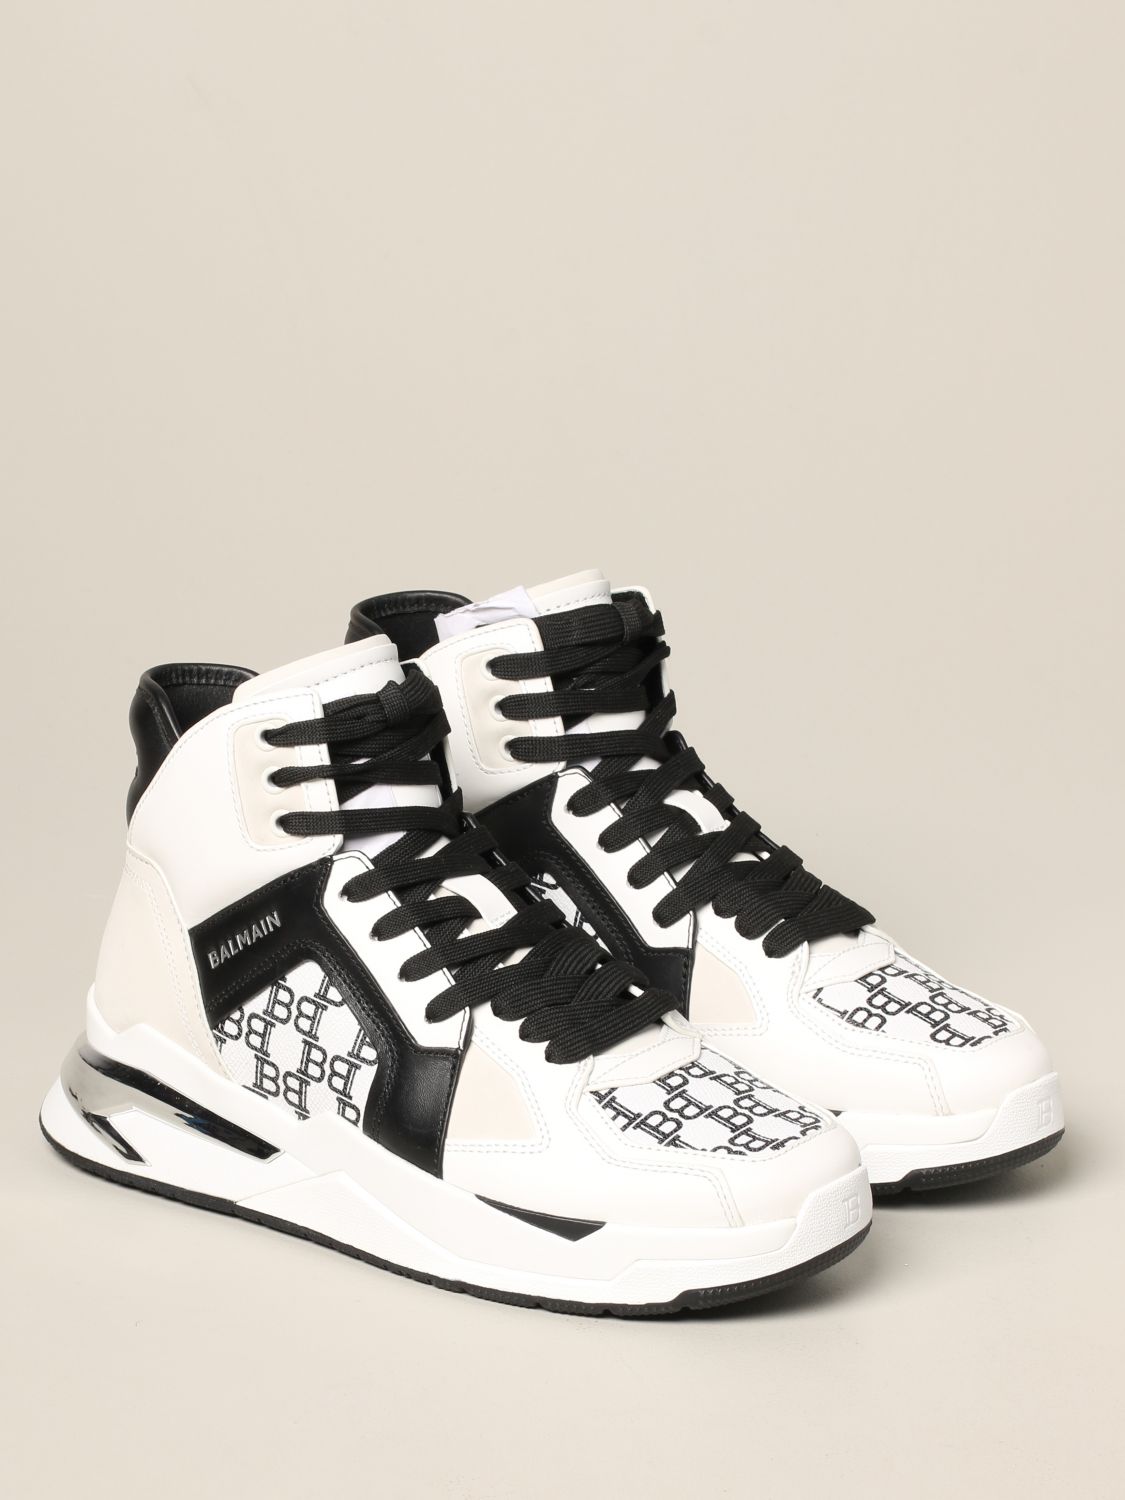 BALMAIN: high sneakers in bicolor leather with all over B print ...